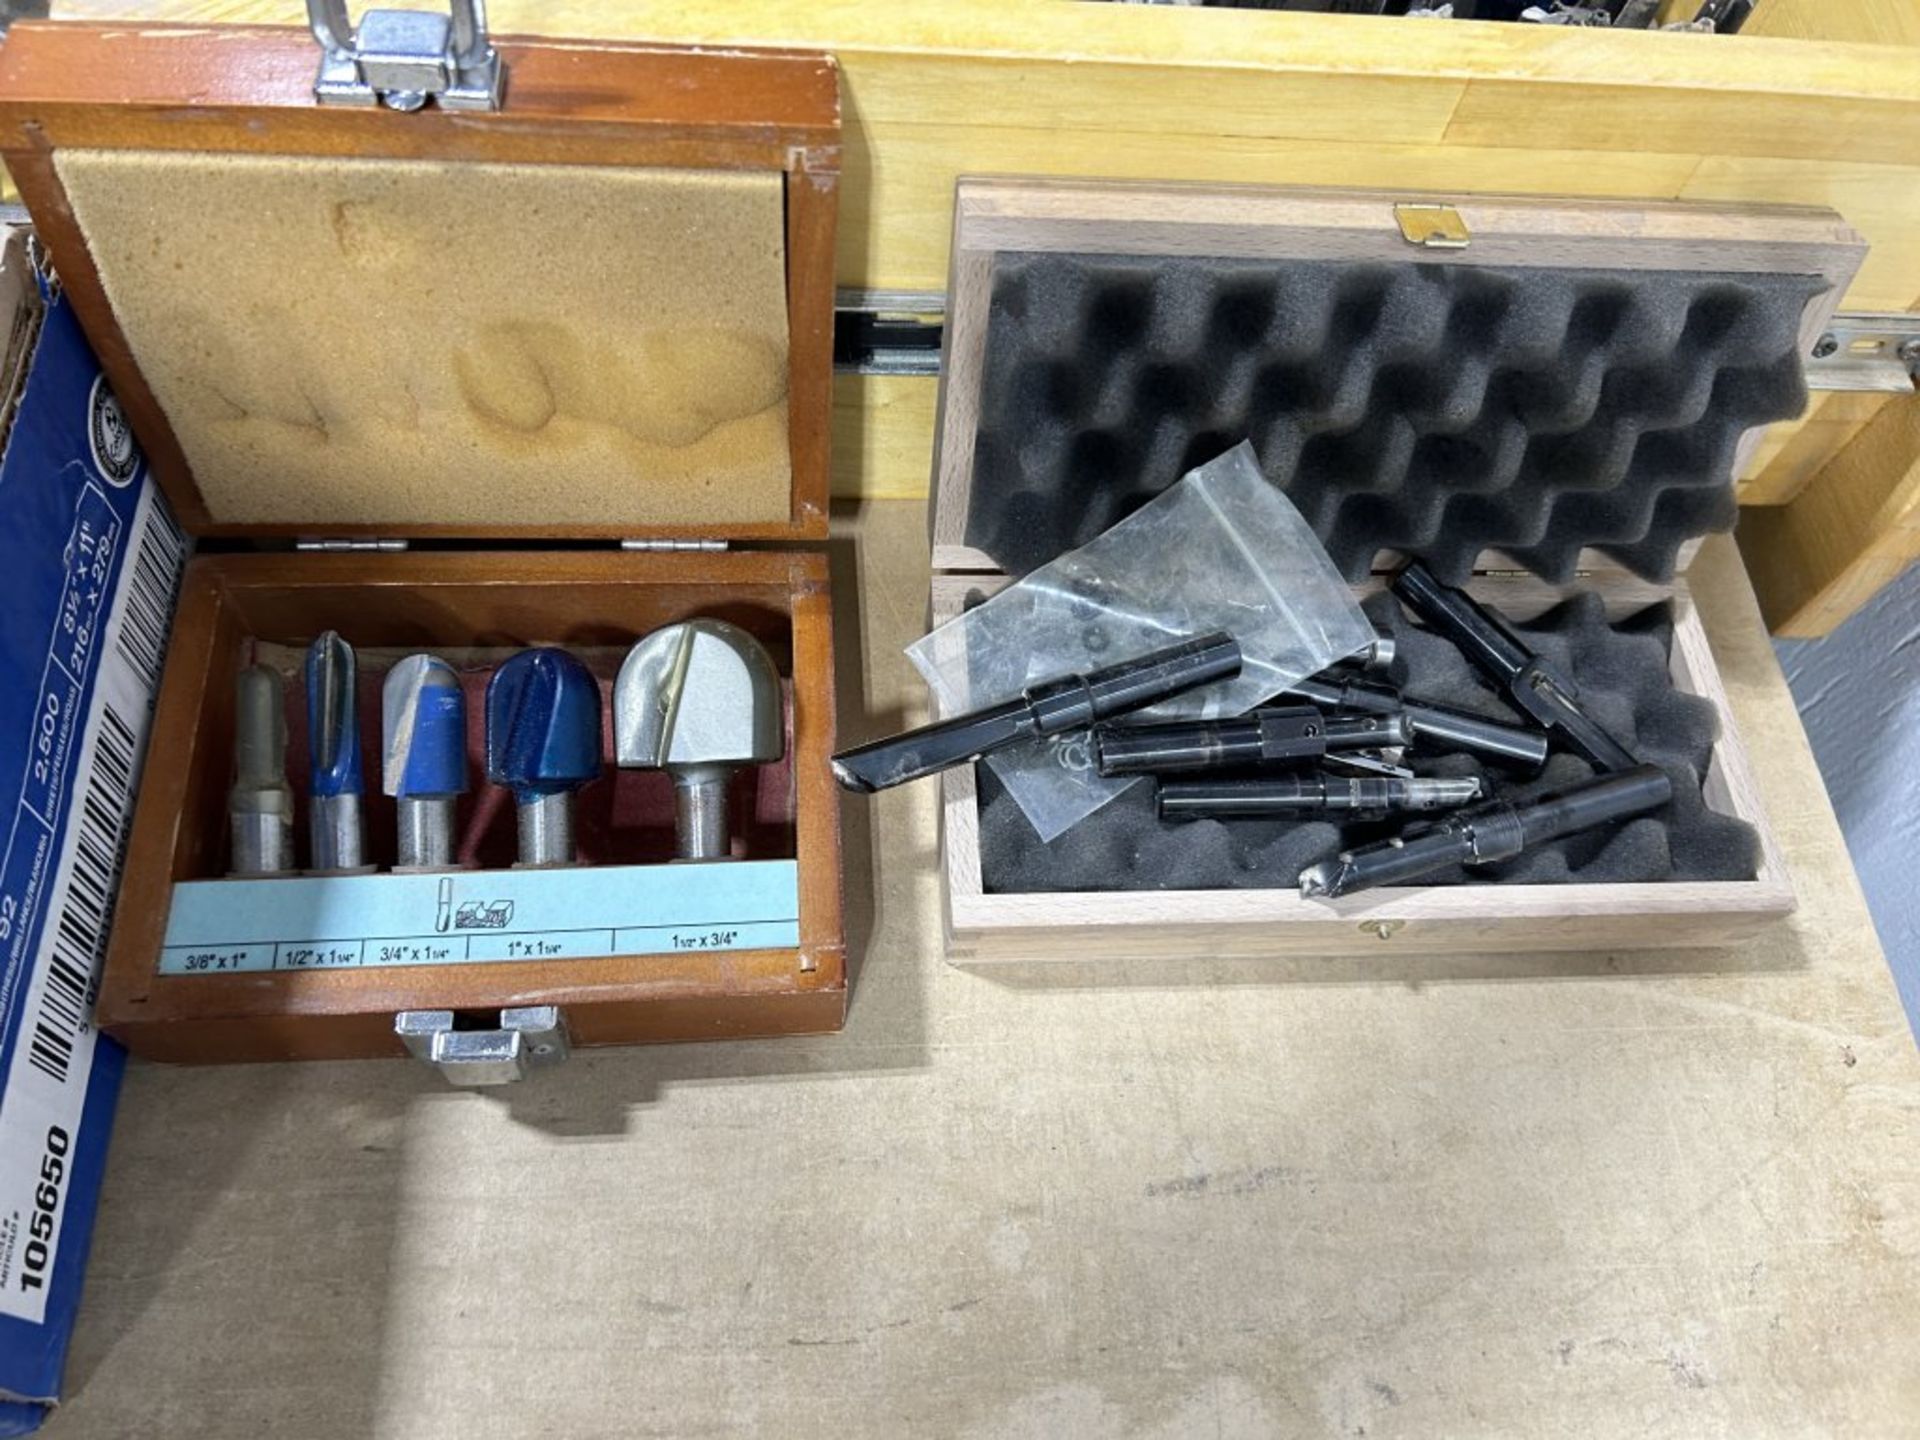 LARGE LOT OF ASSORTED ROUTER BITS, WRENCHES, HANDLES, PARTS, ETC. - Image 3 of 9